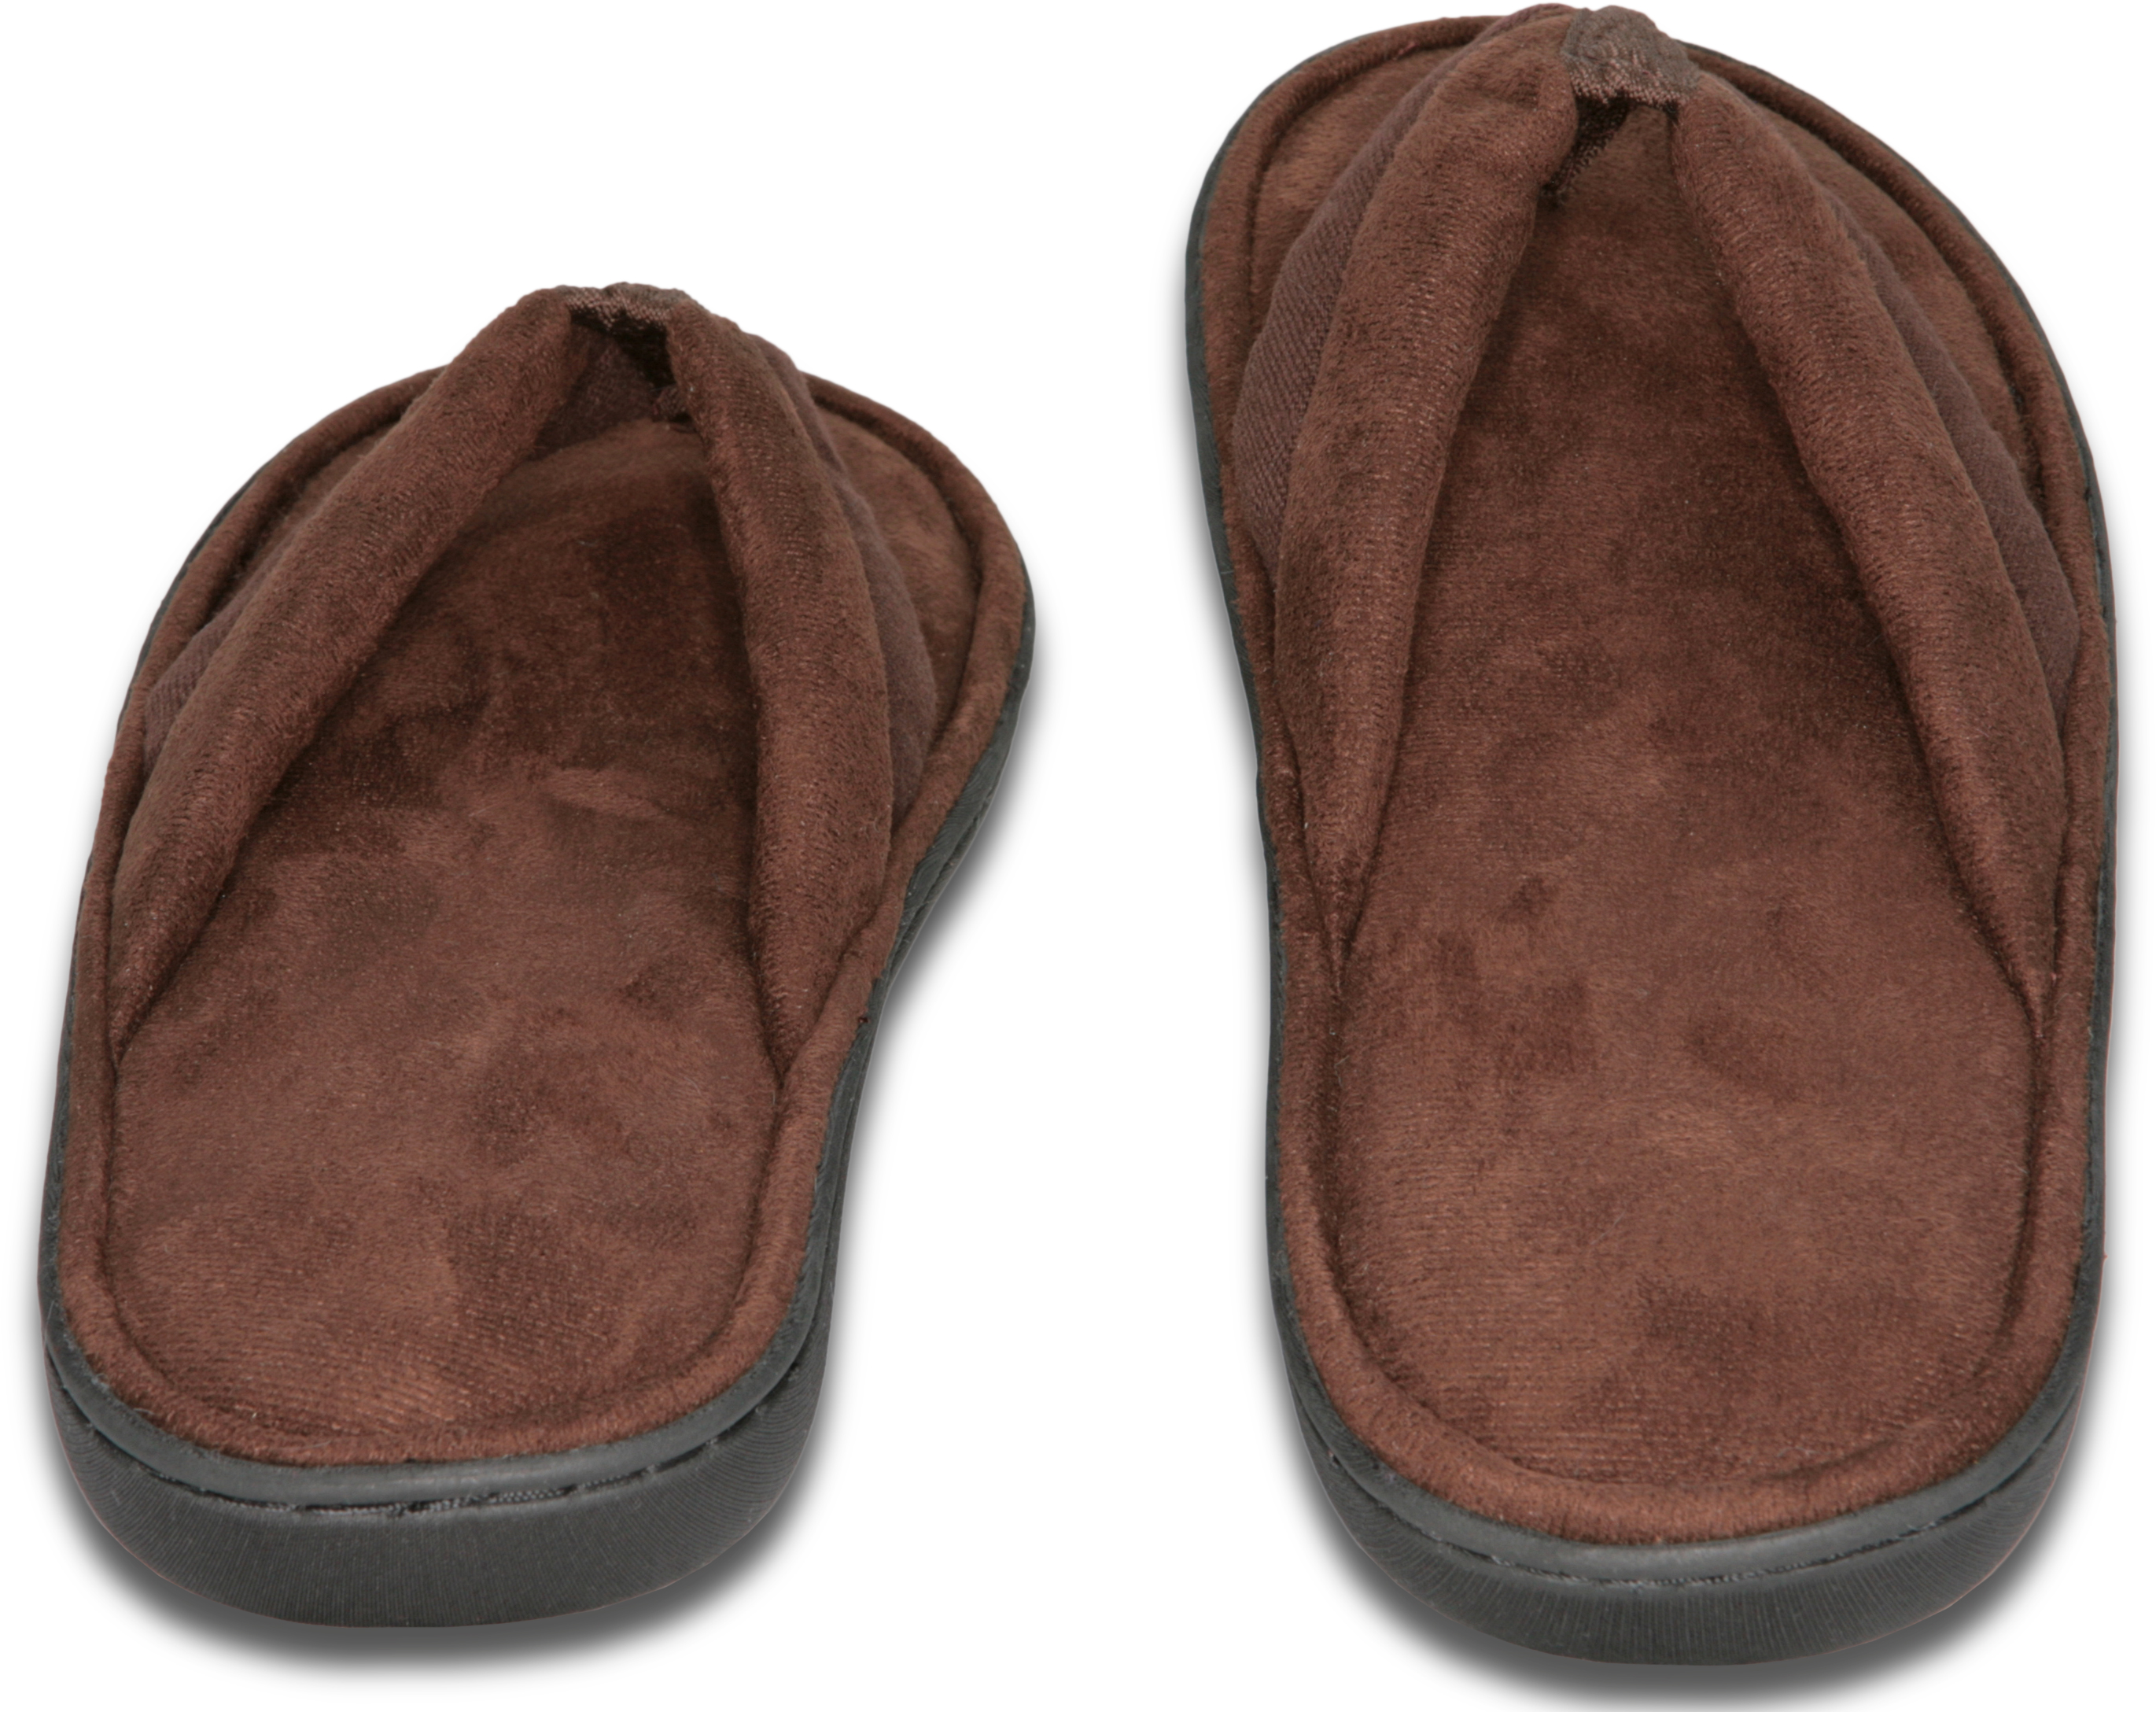 Deluxe Comfort Mens Memory Foam Slipper, Size 11-12 - Soft Linen 120D SBR Insole & Rubber Outsole - Pure Suede Shoes - Non Marking Sole - Mens Slippers, Brown - image 3 of 5